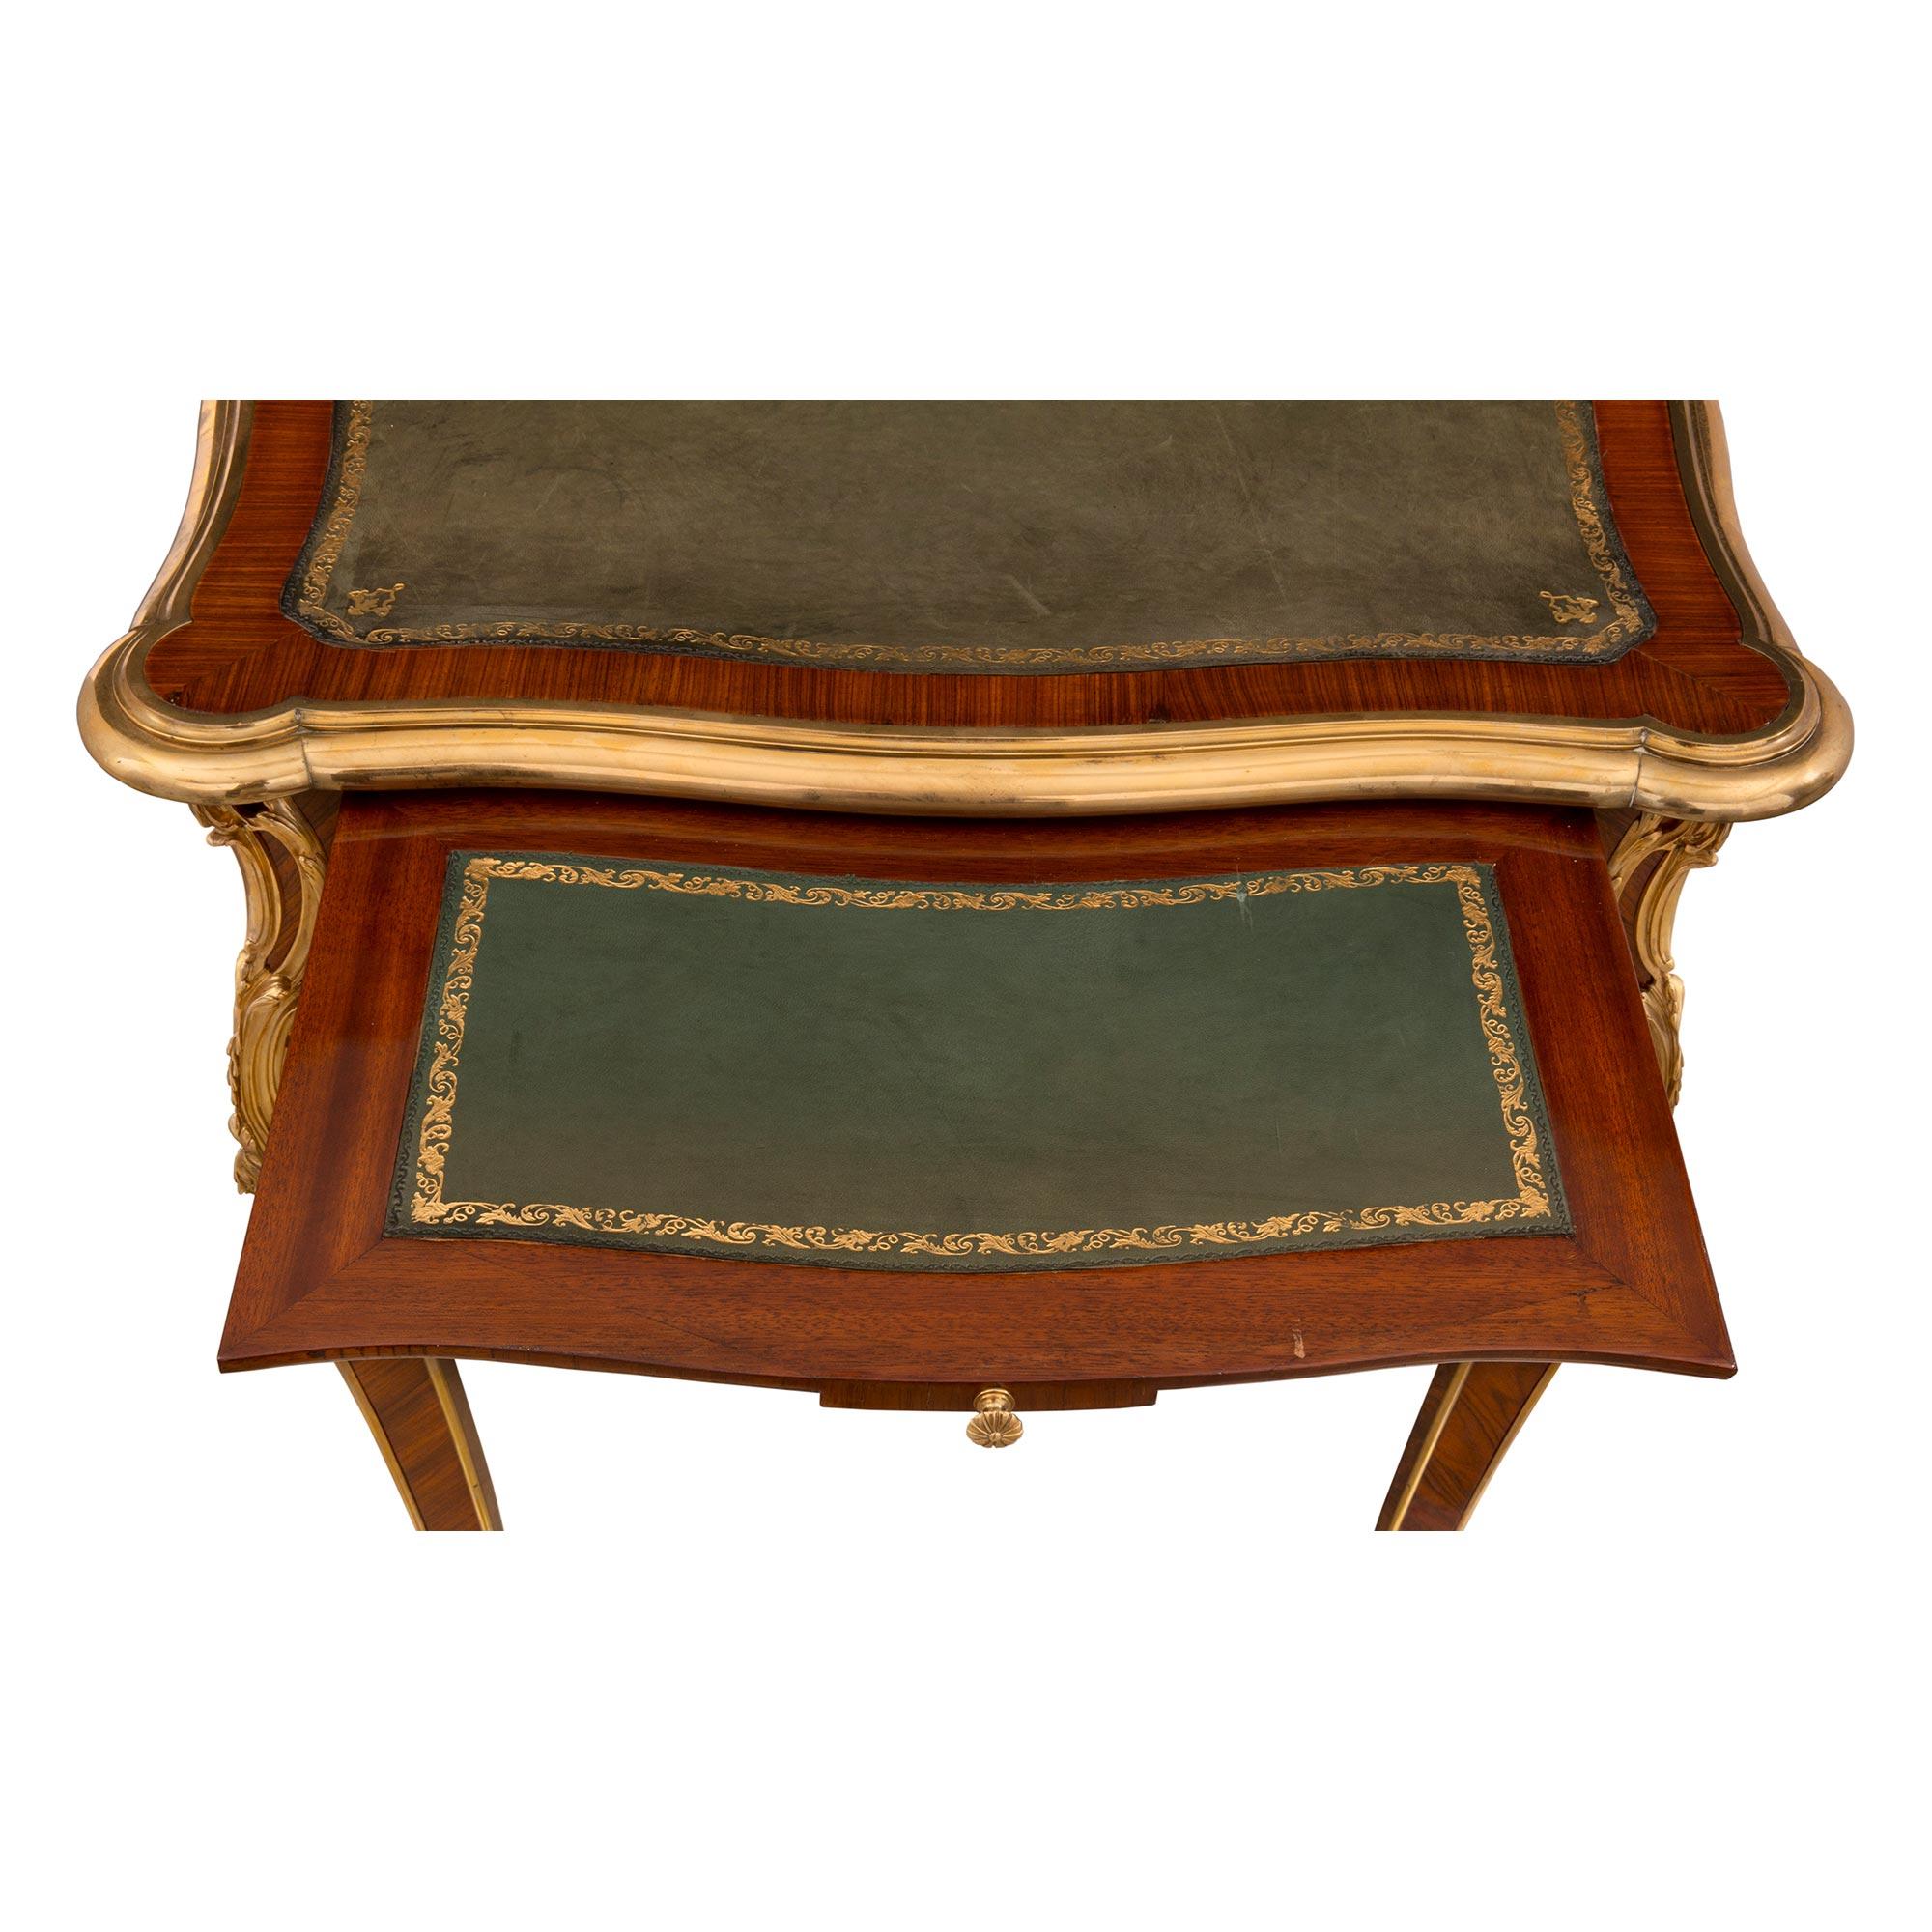 French Mid-19th Century Louis XV Style Kingwood and Ormolu Bureau Plat For Sale 6